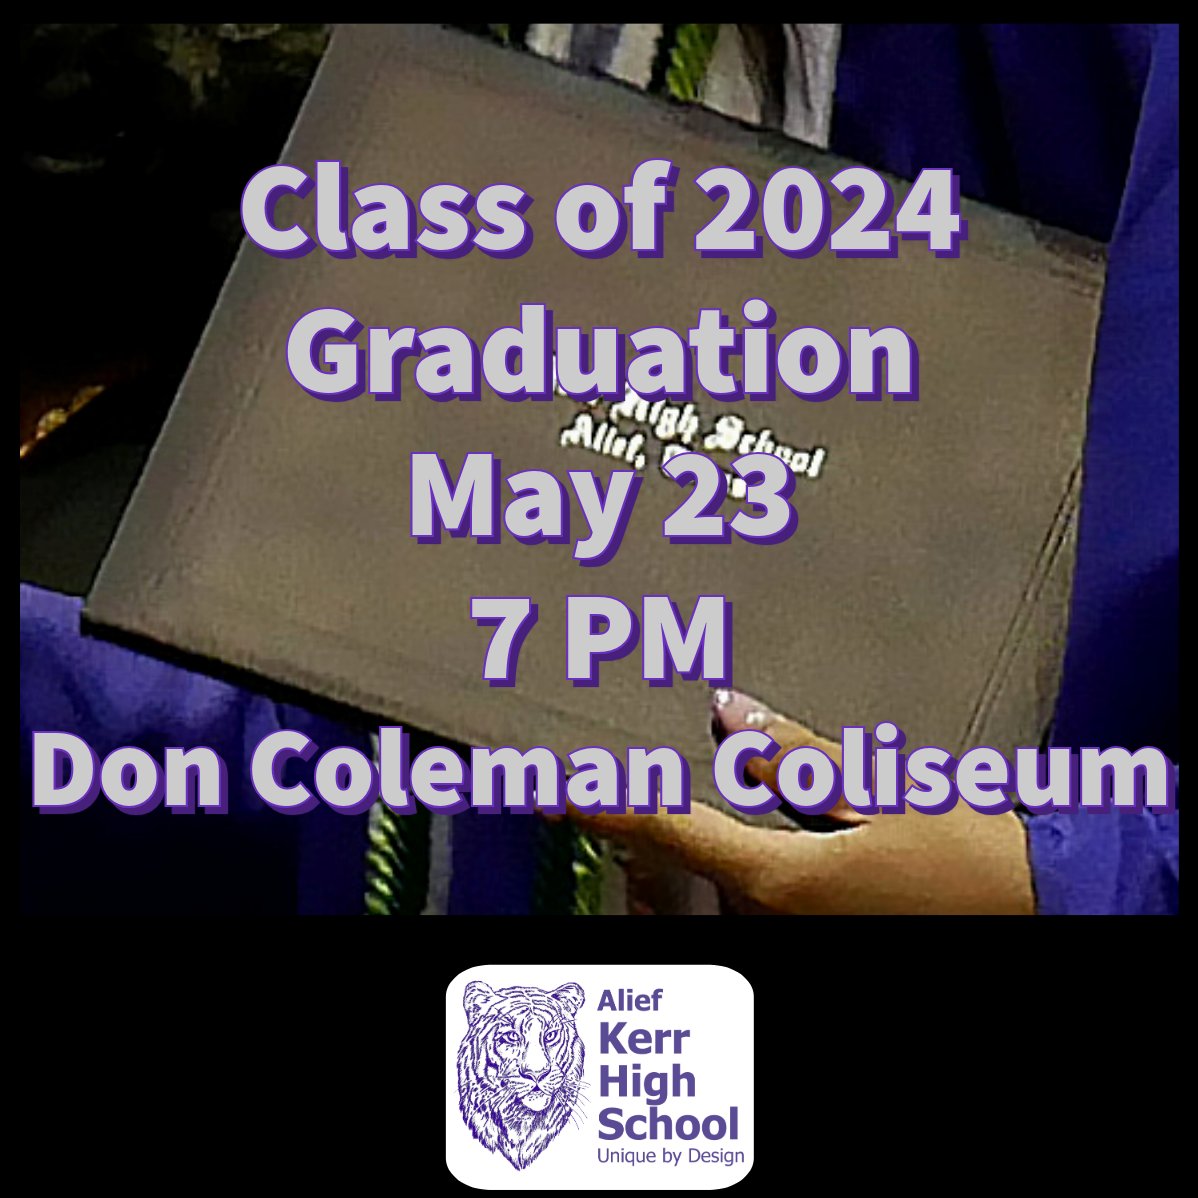 The Class of 2024 will cross the stage at the Don Coleman Coliseum in Spring Branch at 7 PM Thursday, May 23, 2024. Seniors should report by 6 PM. #Kerrturns30 #Classof2024 maps.app.goo.gl/e437fEE78LwXXX…